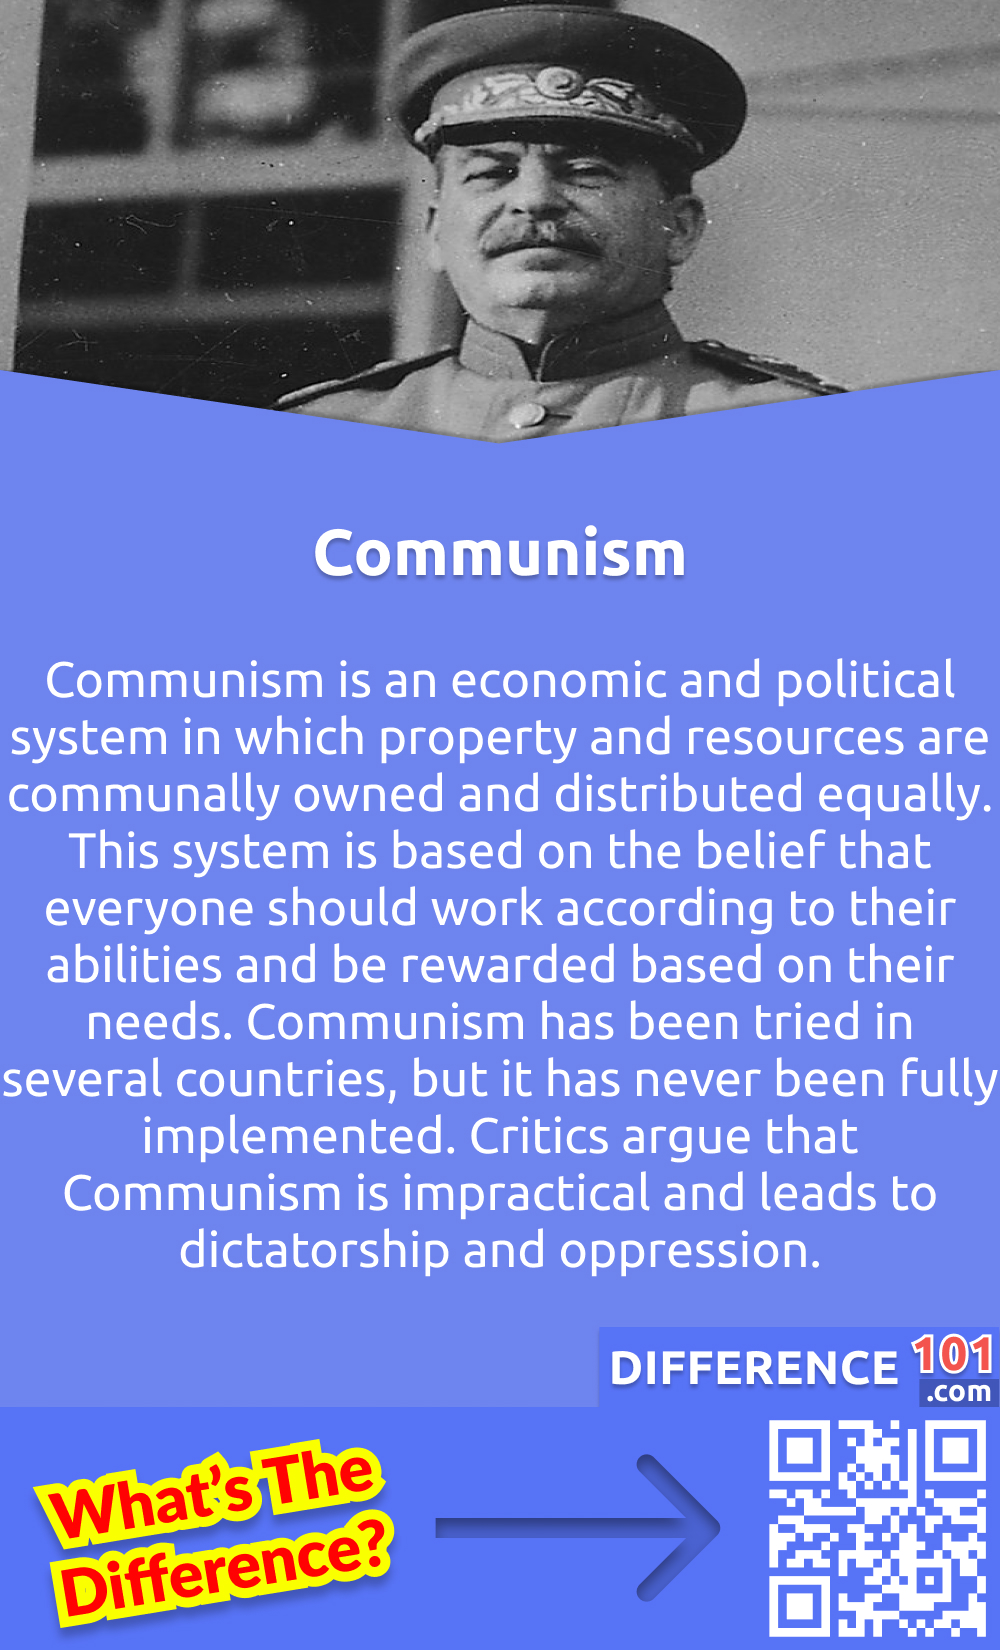 What Is Communism? Communism is an economic and political system in which property and resources are communally owned and distributed equally. This system is based on the belief that everyone should work according to their abilities and be rewarded based on their needs. Communism has been tried in several countries, but it has never been fully implemented. Critics argue that Communism is impractical and leads to dictatorship and oppression.